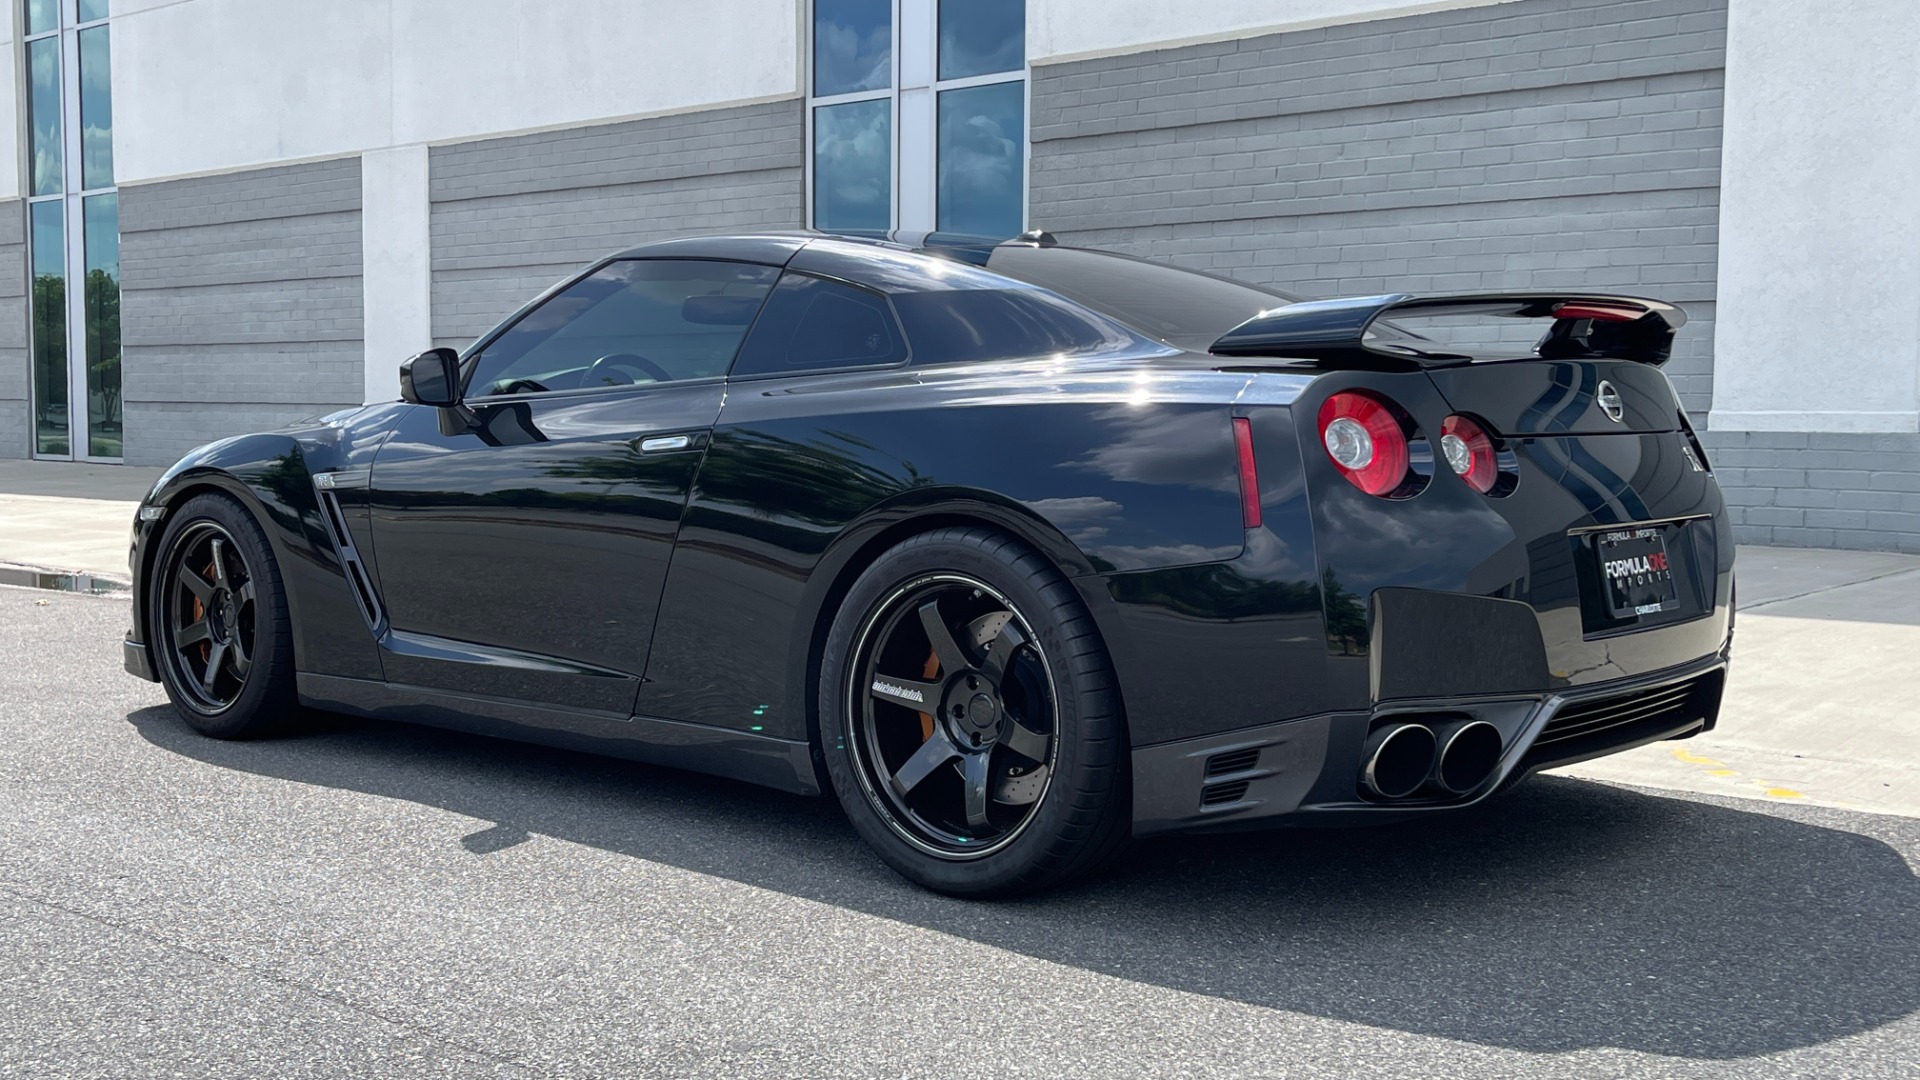 Used 2013 Nissan GT-R PREMIUM COUPE / 3.8L TWIN-TURBO / 6-SPD AUTO / COLD WTHR PKG / CAMERA for sale $70,995 at Formula Imports in Charlotte NC 28227 6